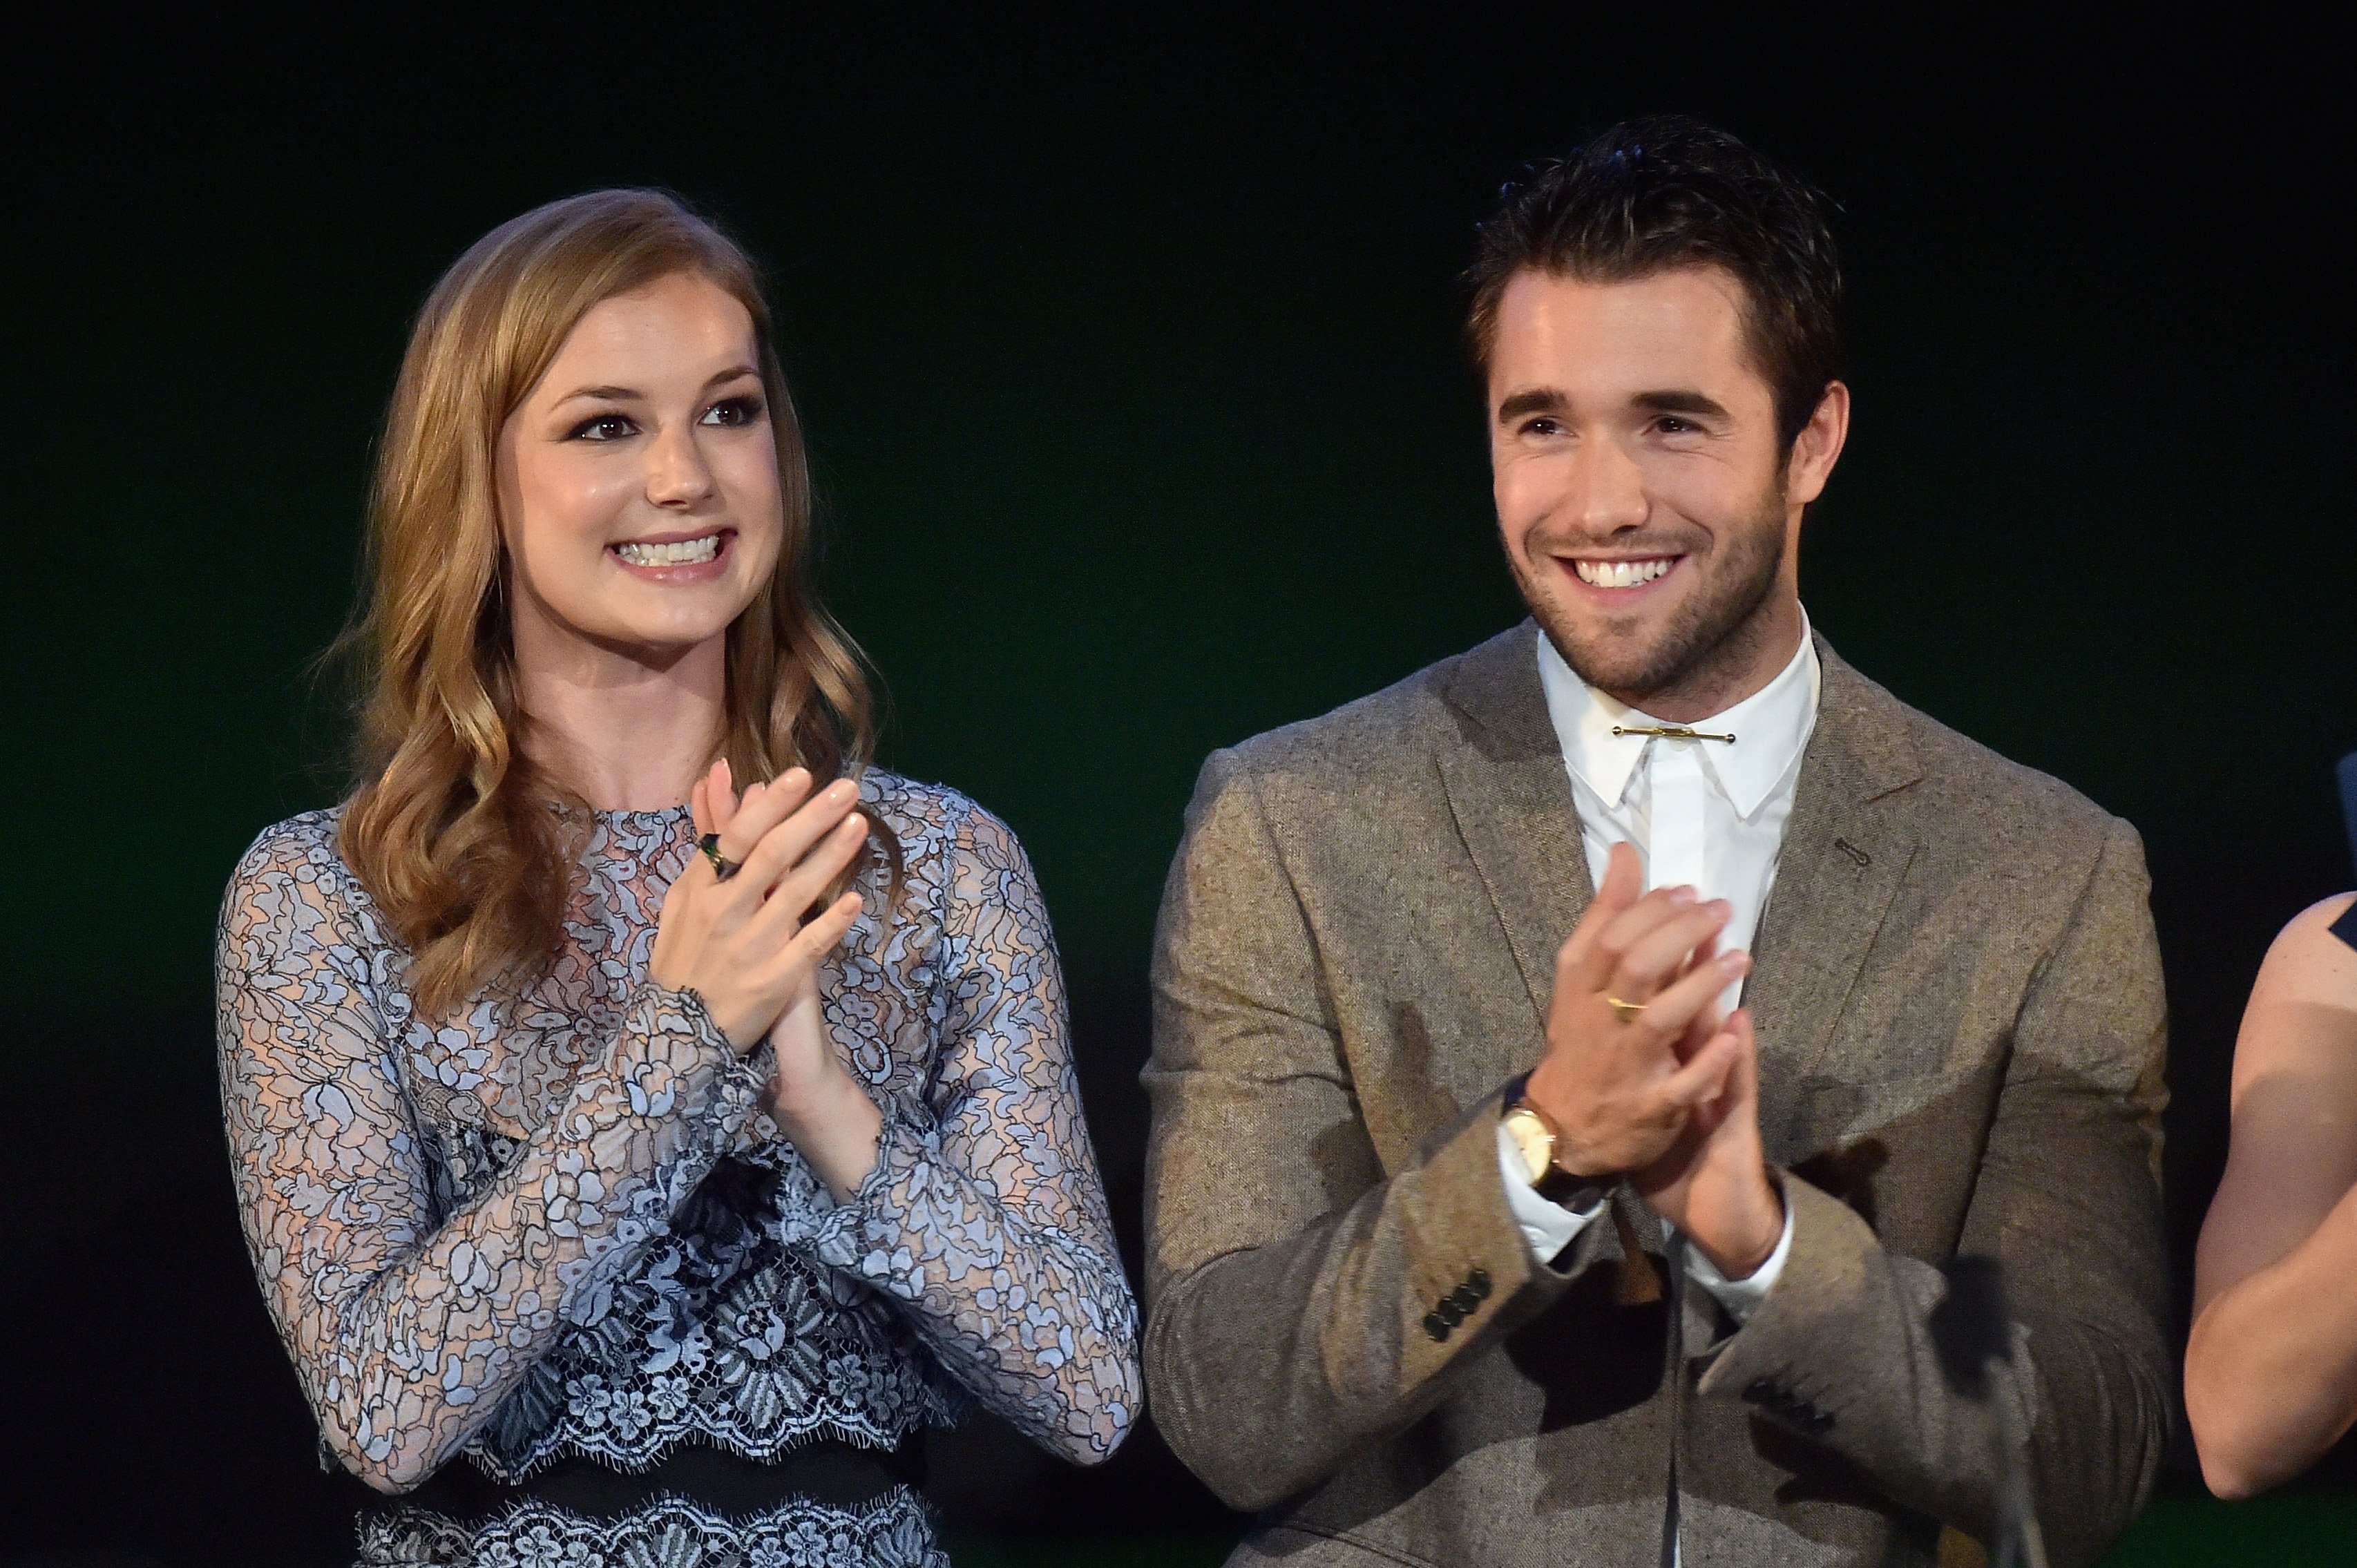 Emily VanCamp and her husband Joshua Bowman speak at the 24th Annual Environmental Media Awards at Warner Bros. Studio on October 18, 2014 in Burbank, California | Photo: Getty Images